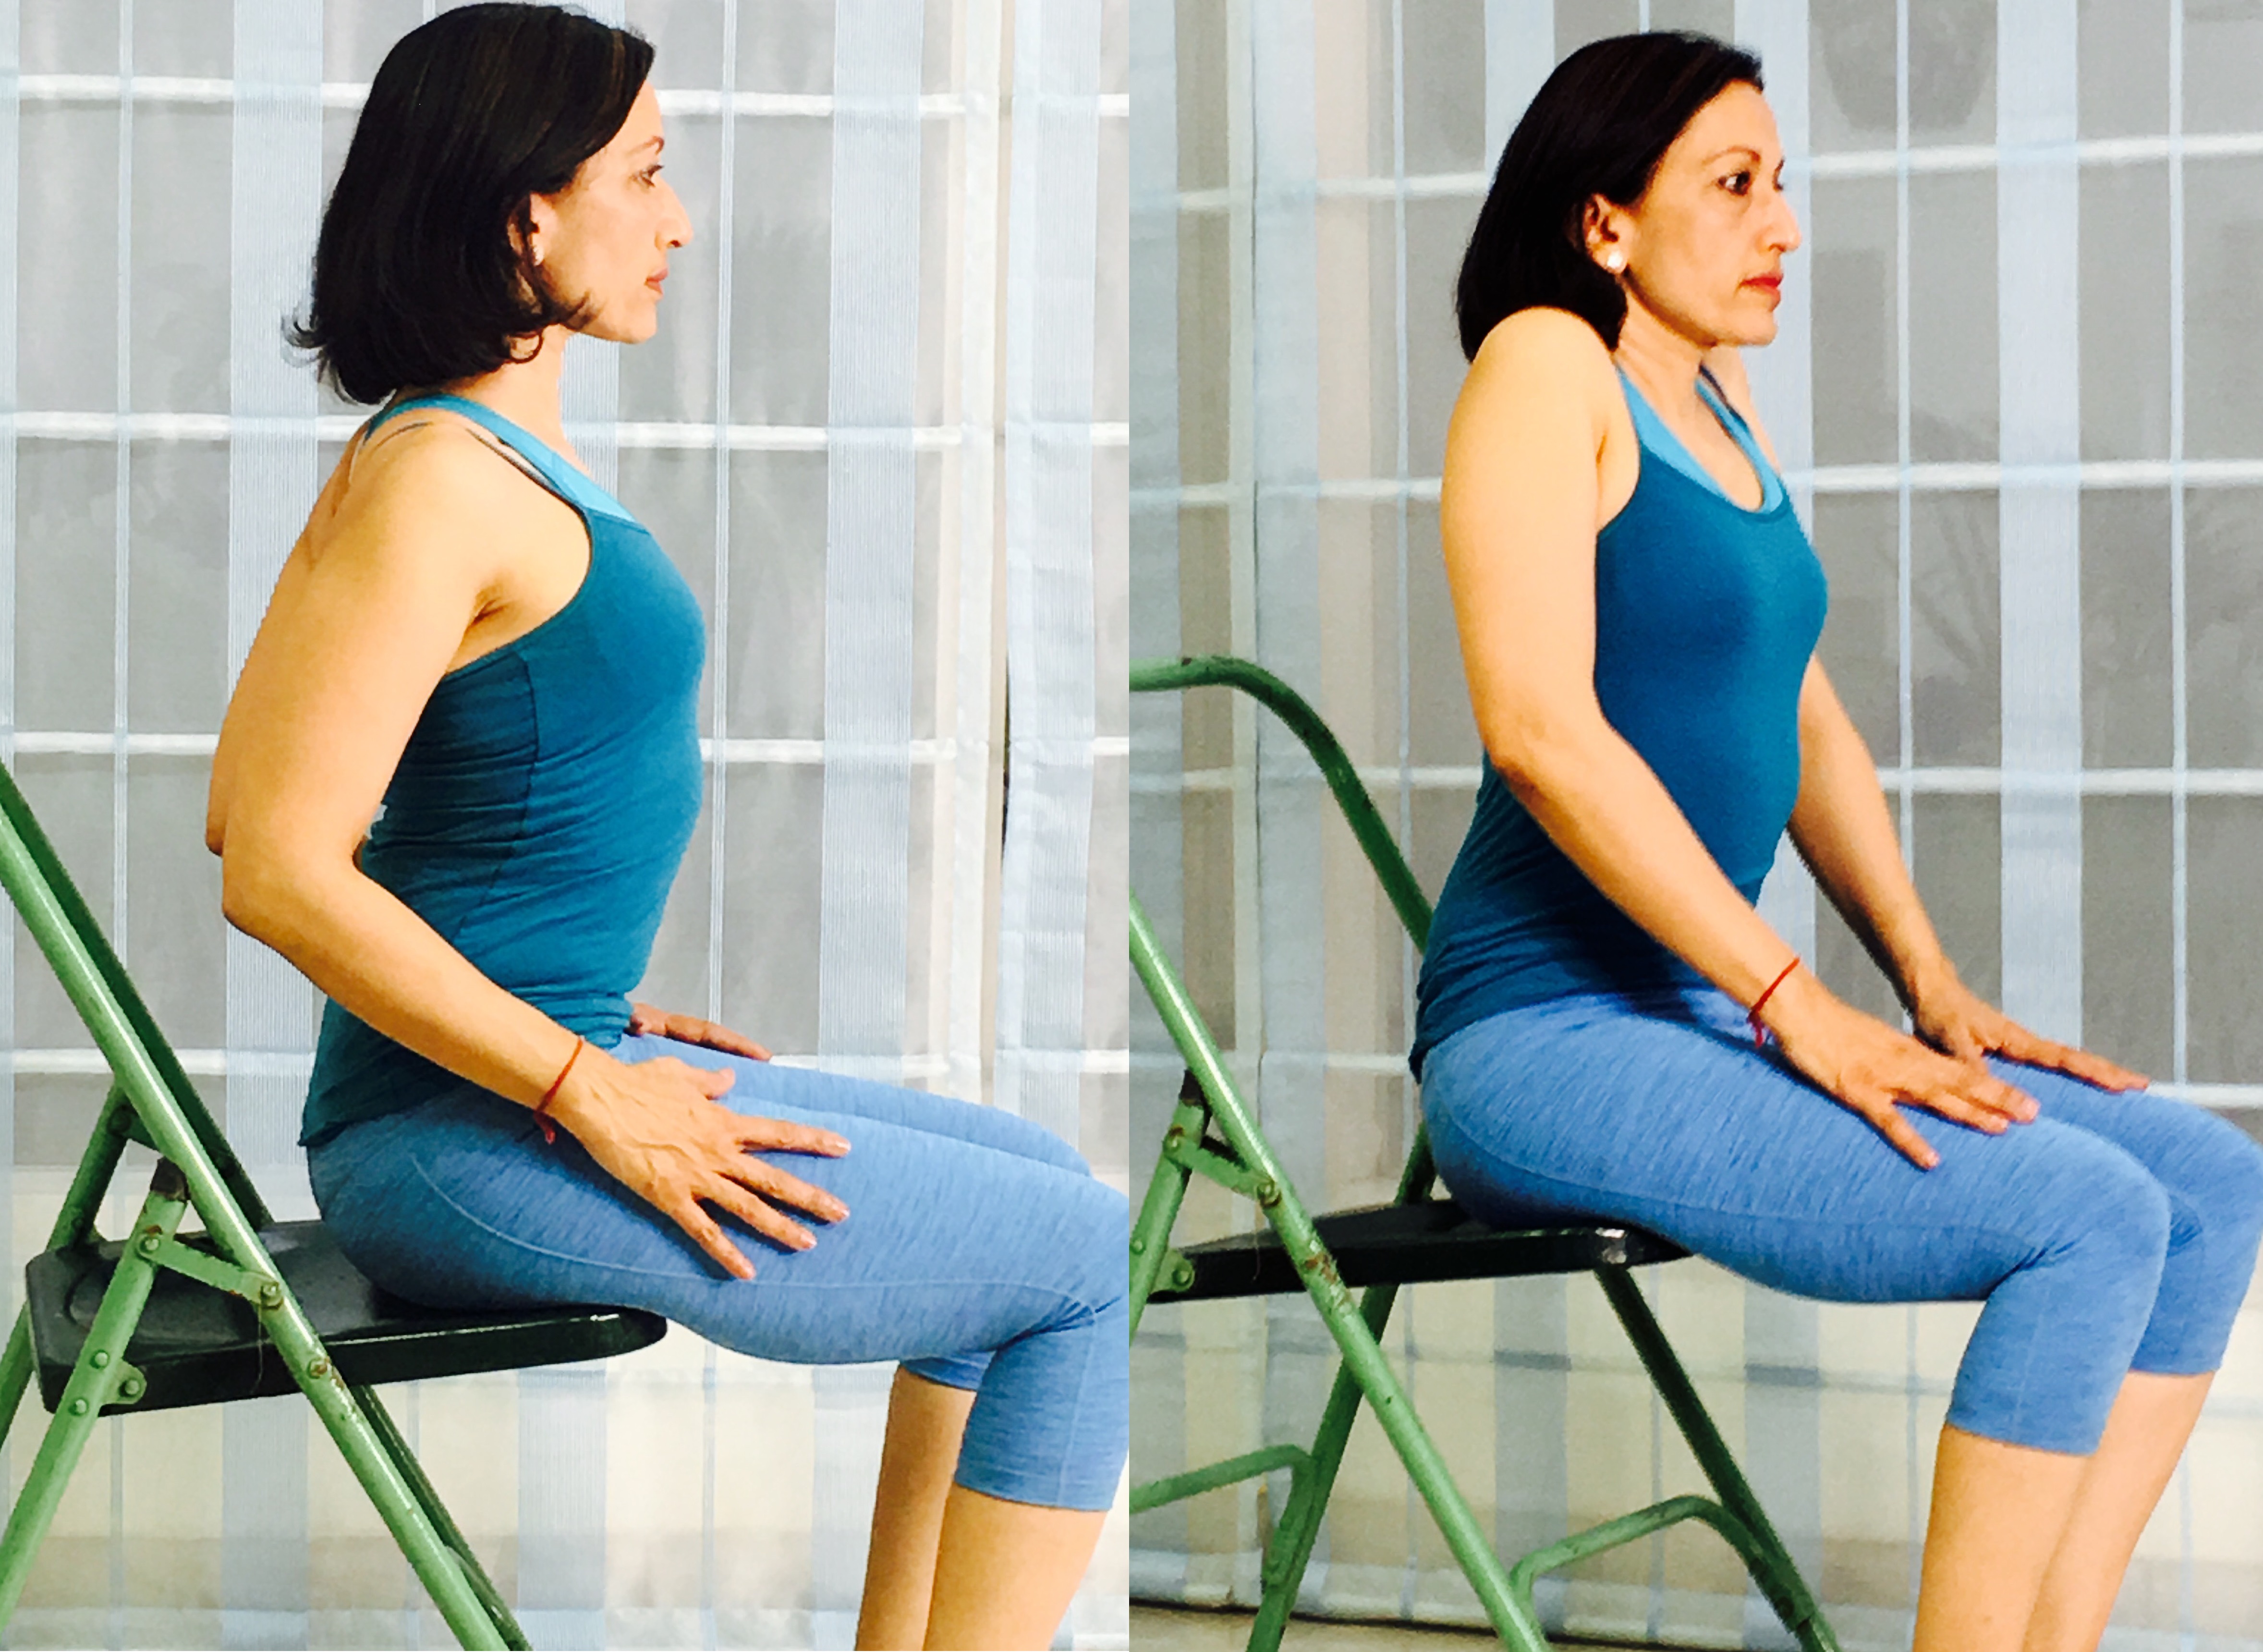 5 Chair Yoga Poses for All Ages and Practice Levels - DoYou-cheohanoi.vn